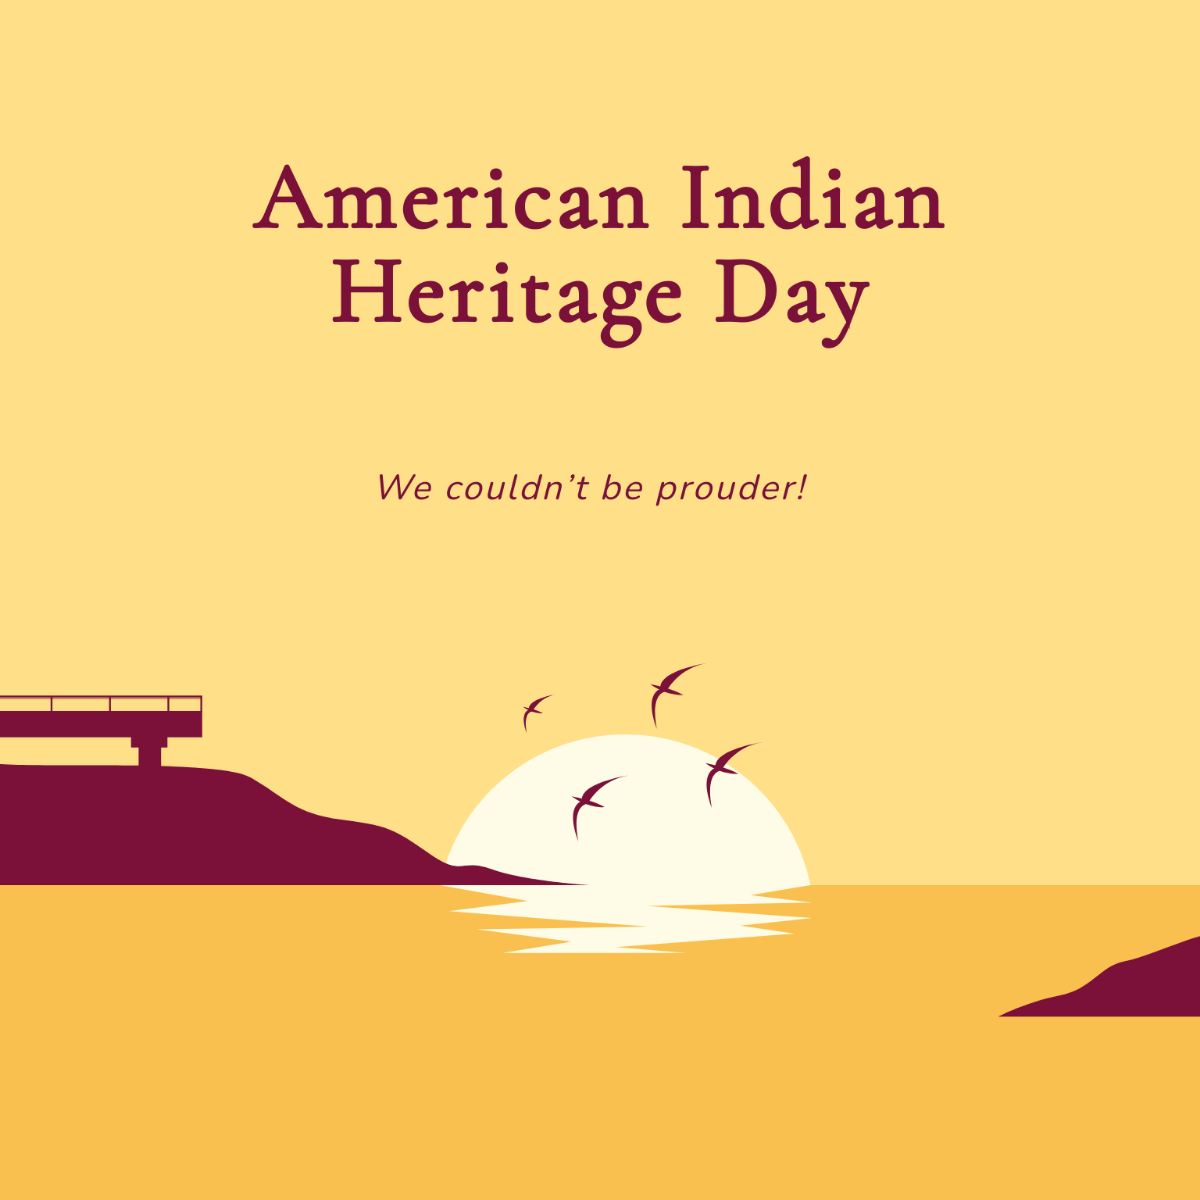 American Indian Heritage Day Poster Vector Template